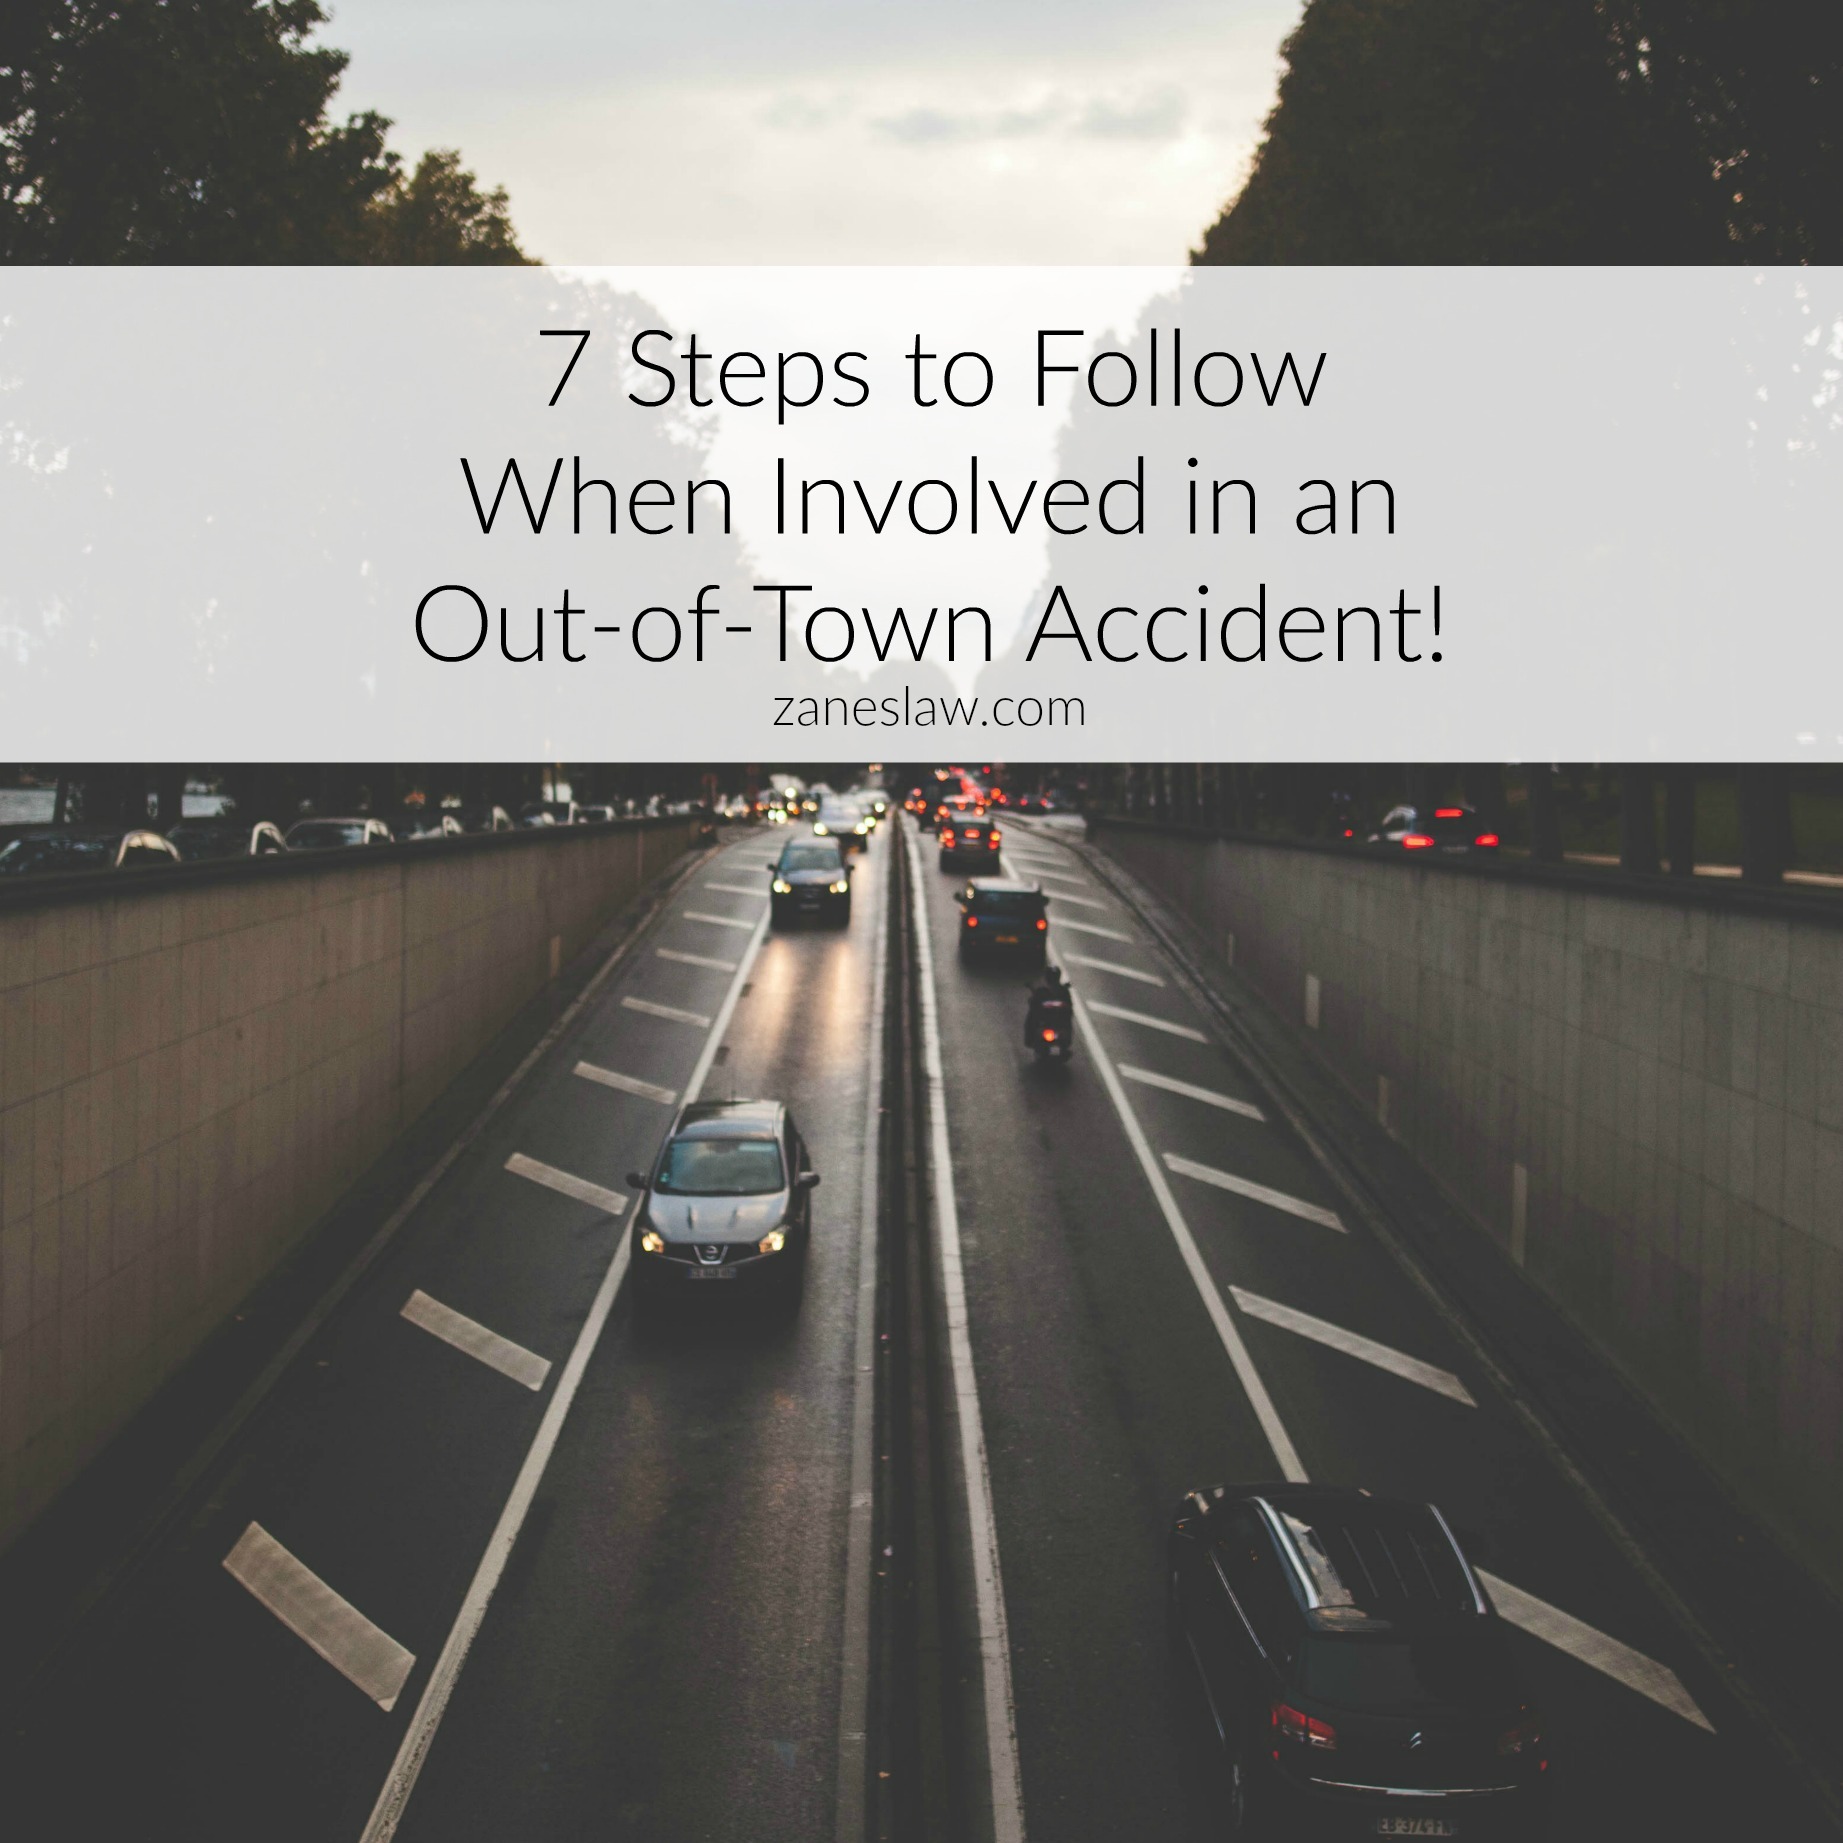 7 Steps to Follow When Involved in an Out-of-Town Accident!